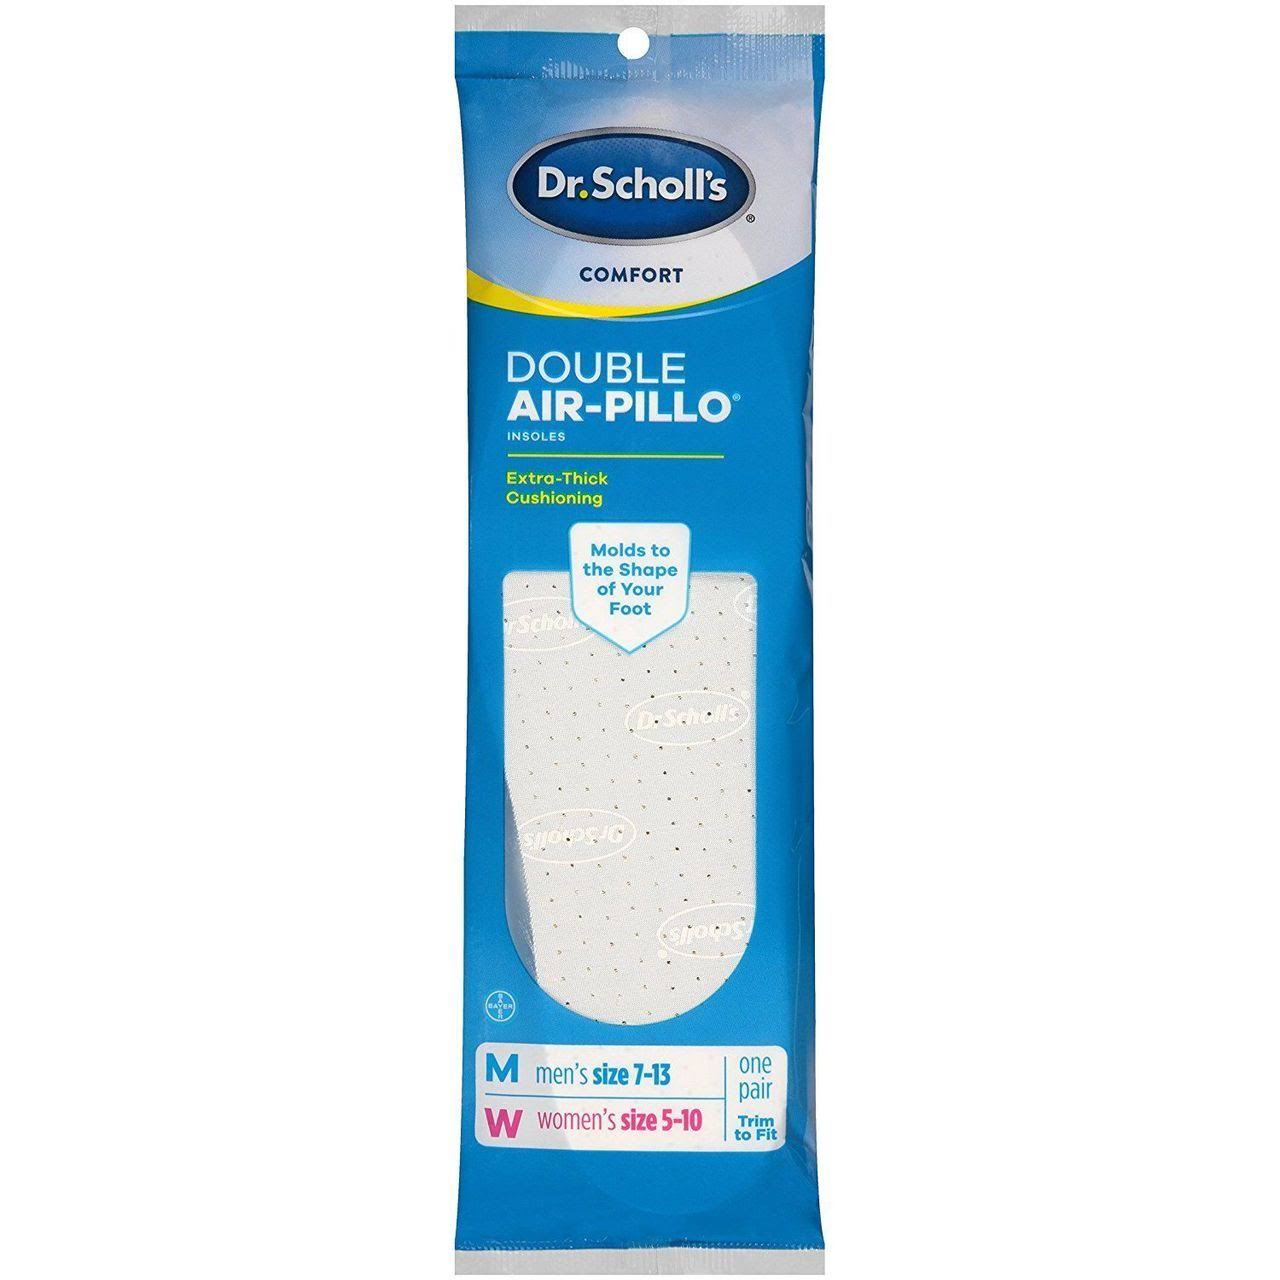 Dr Scholls Comfort Double Air Pillo Insoles - 7 to 13 USM, 5 to 10 USW